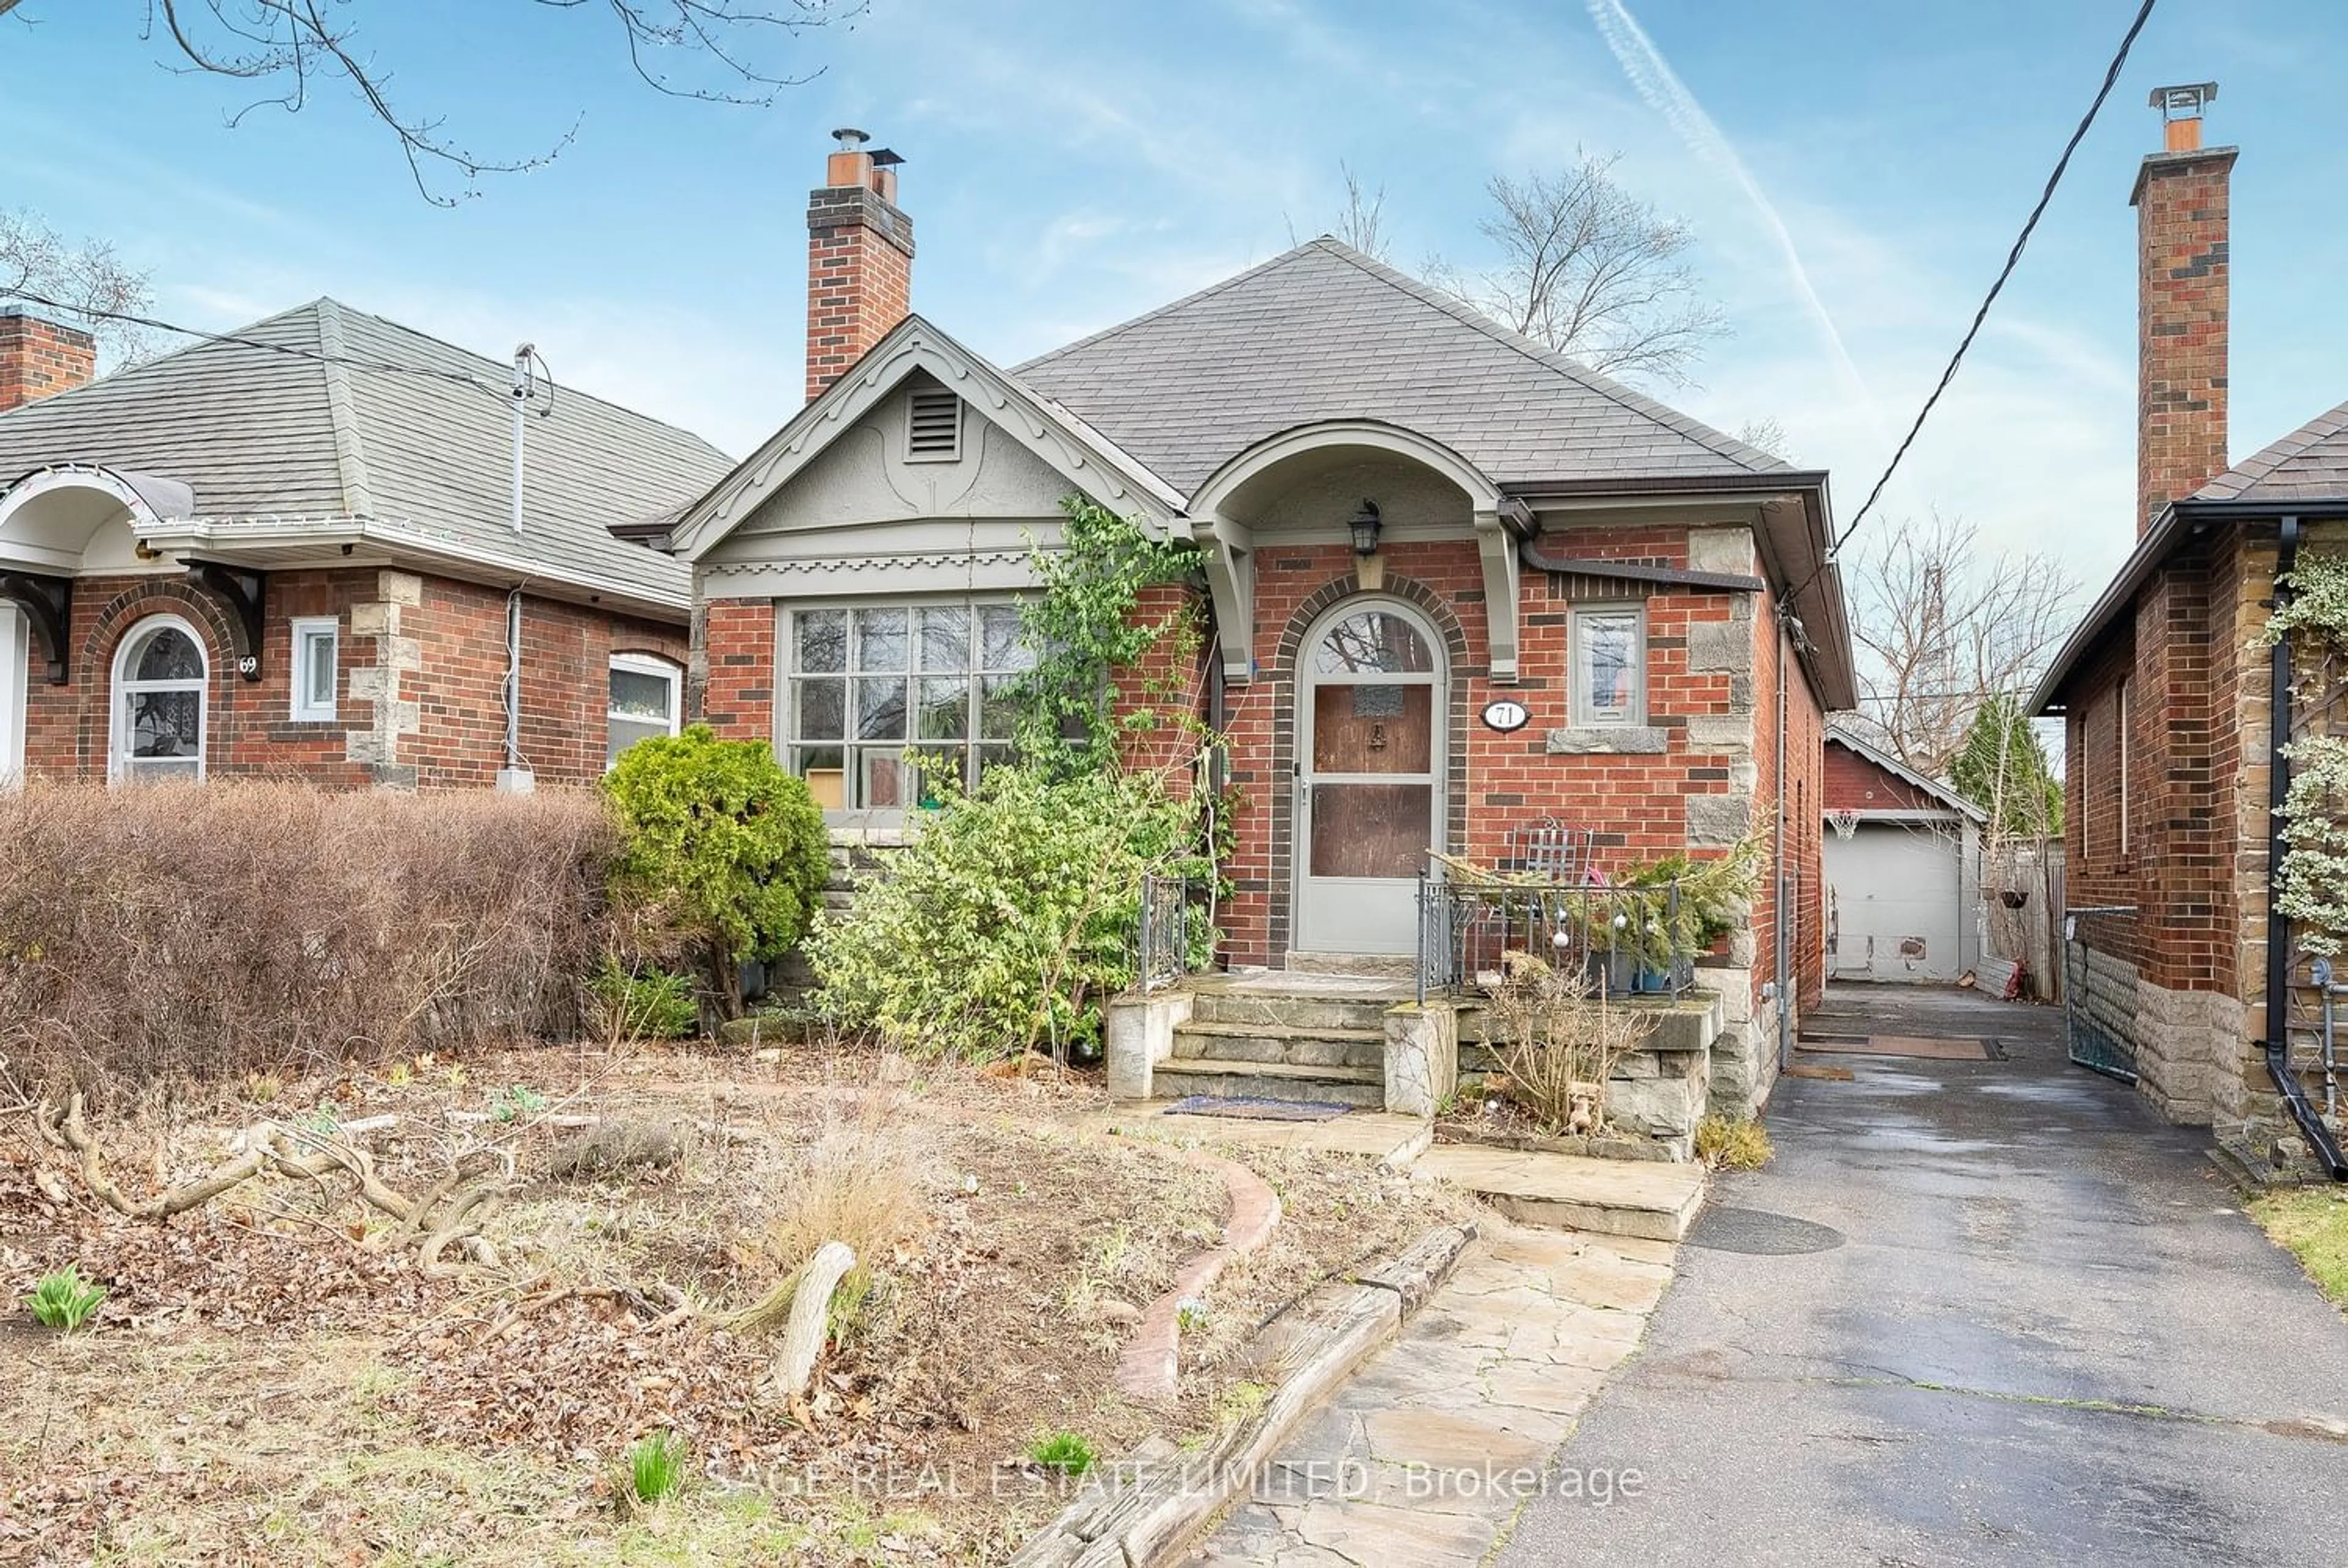 Frontside or backside of a home for 71 Delemere Ave, Toronto Ontario M6N 1Z8